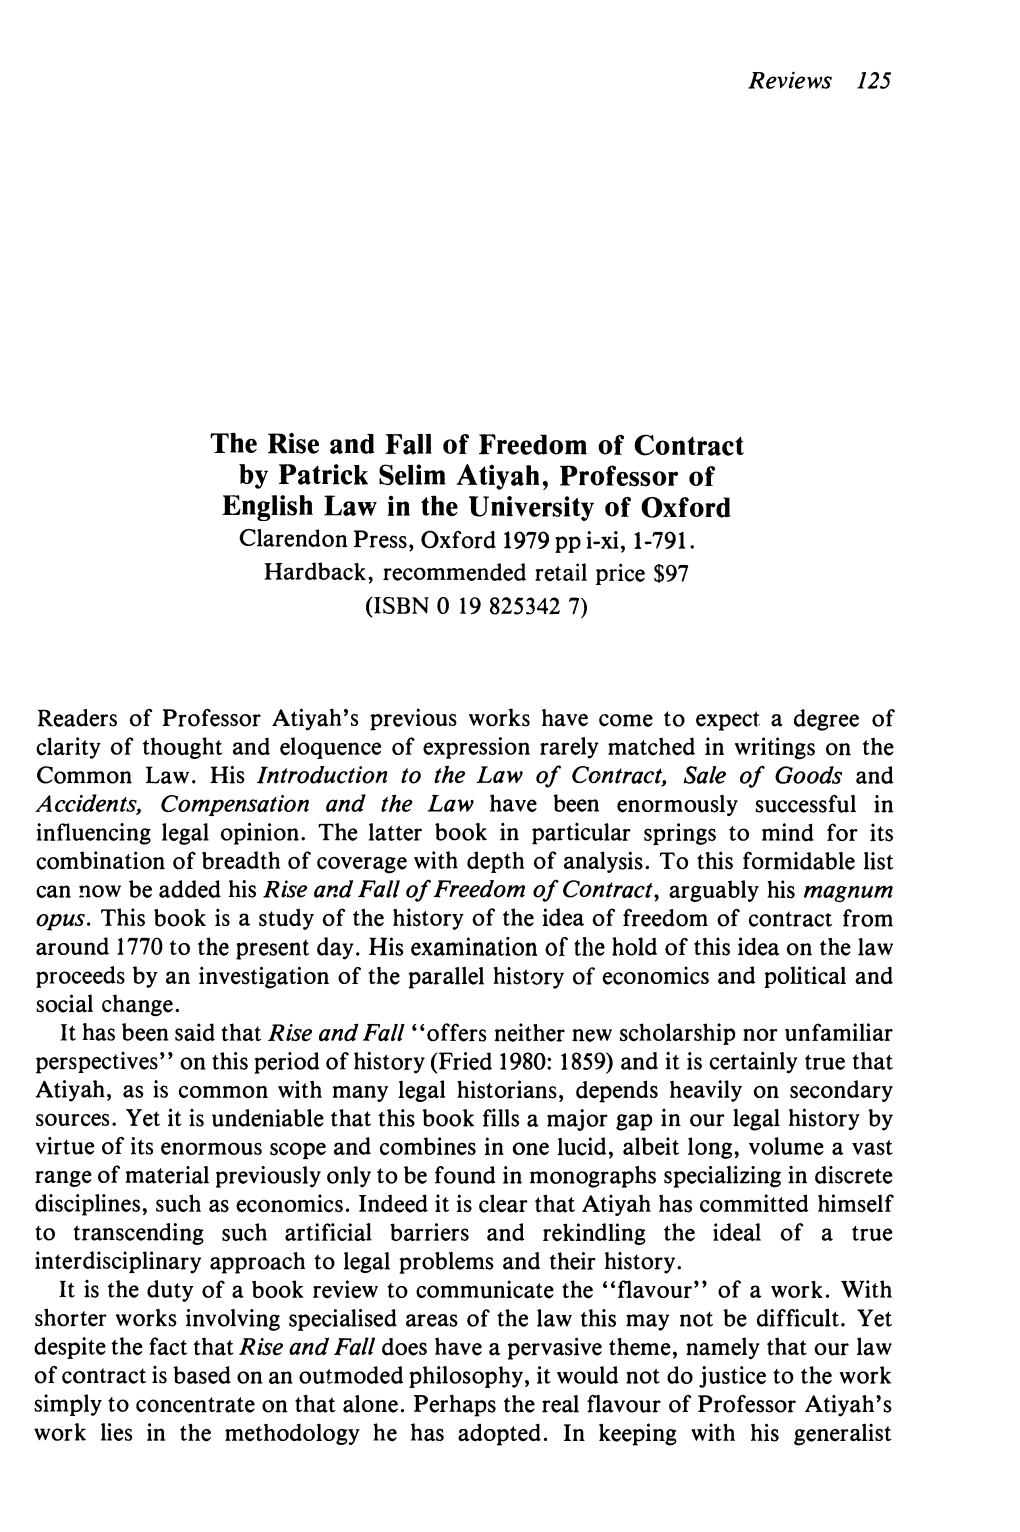 The Rise and Fall of Freedom of Contract by Patrick Selim Atiyah, Professor of English Law in the University of Oxford Clarendon Press, Oxford 1979 Pp I-Xi, 1-791